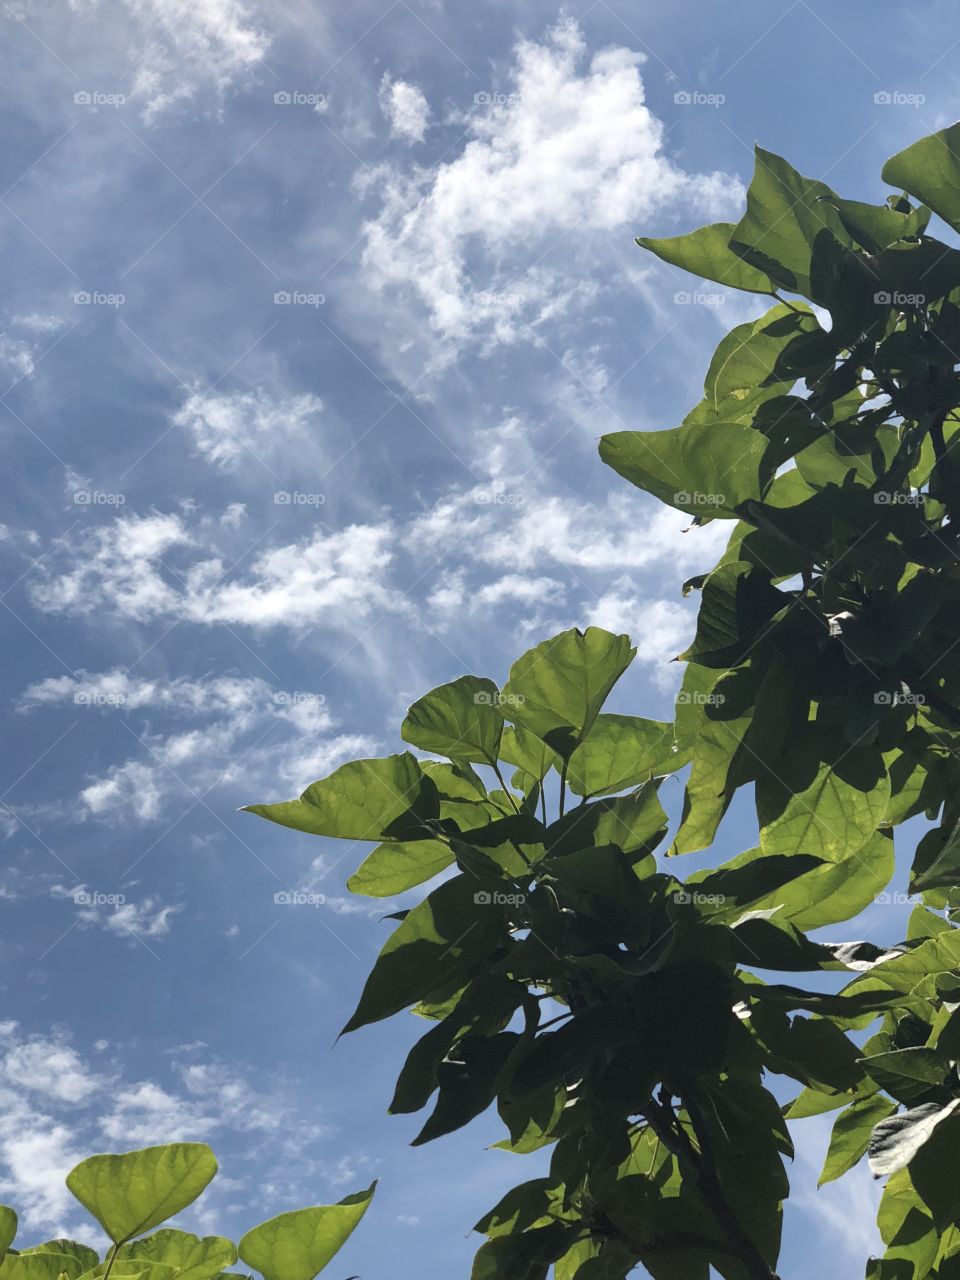 Beautiful sky with clouds shinning through the tree leaves